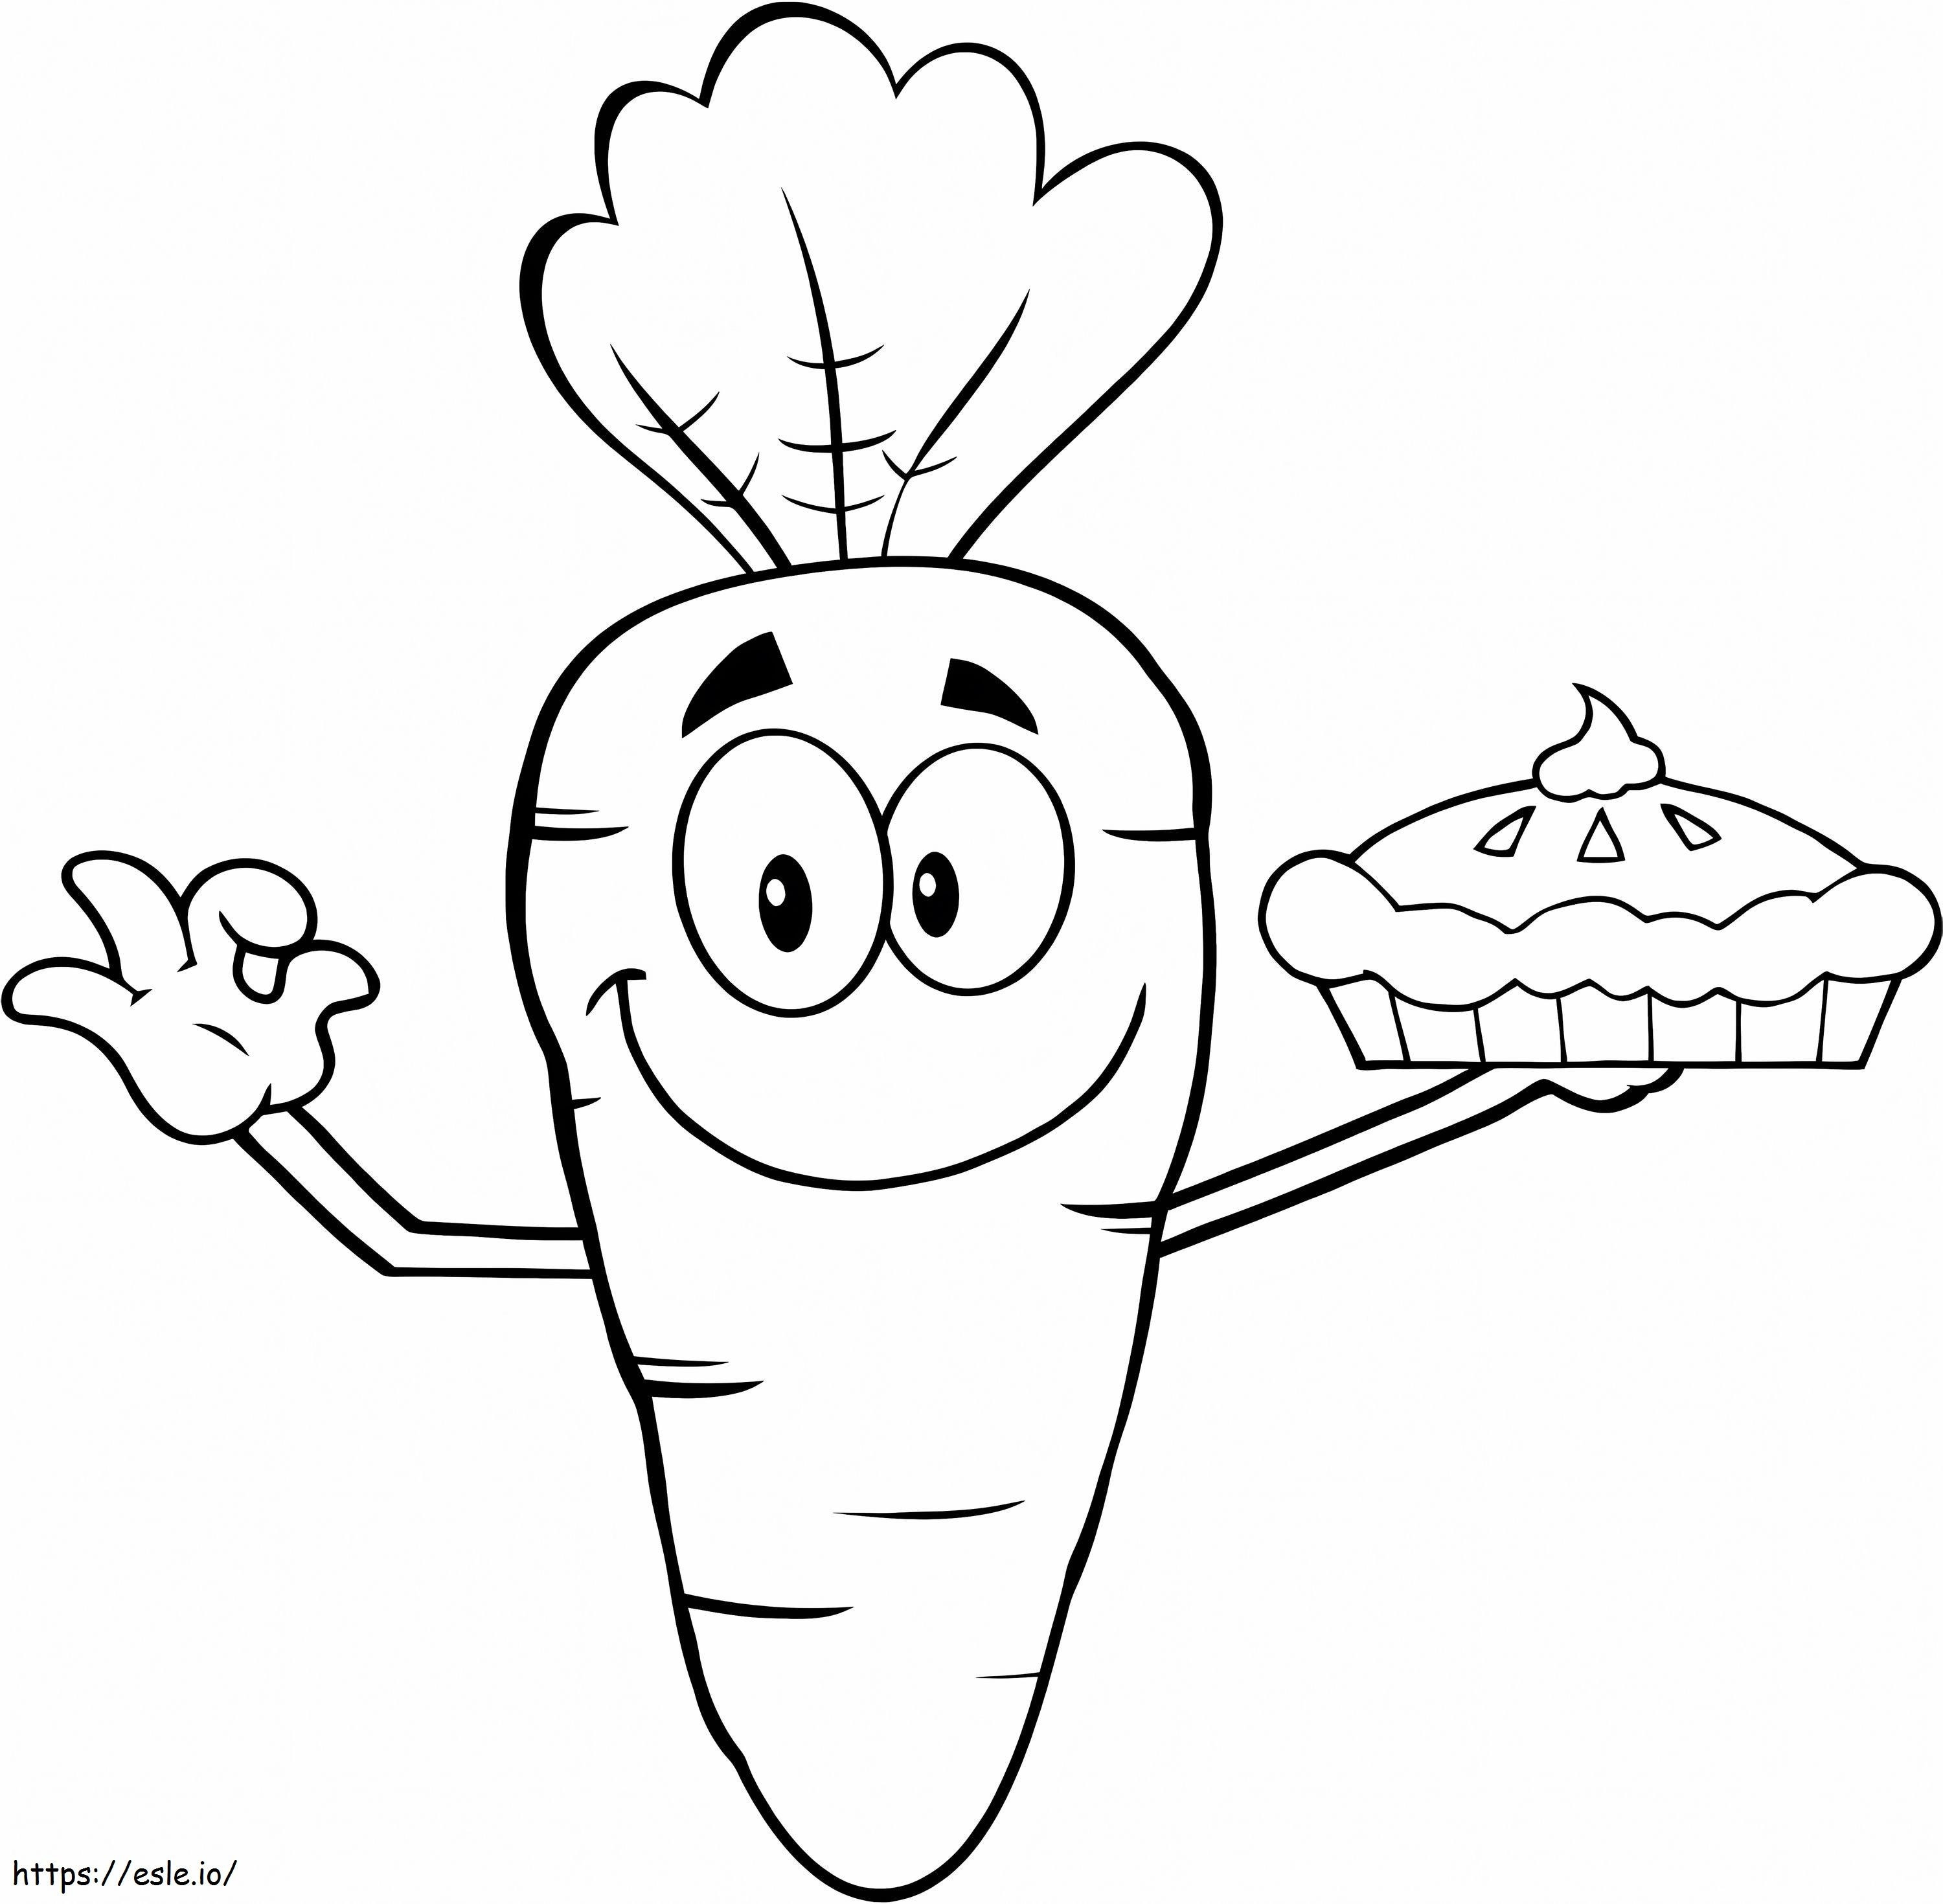 Carrot Cake coloring page